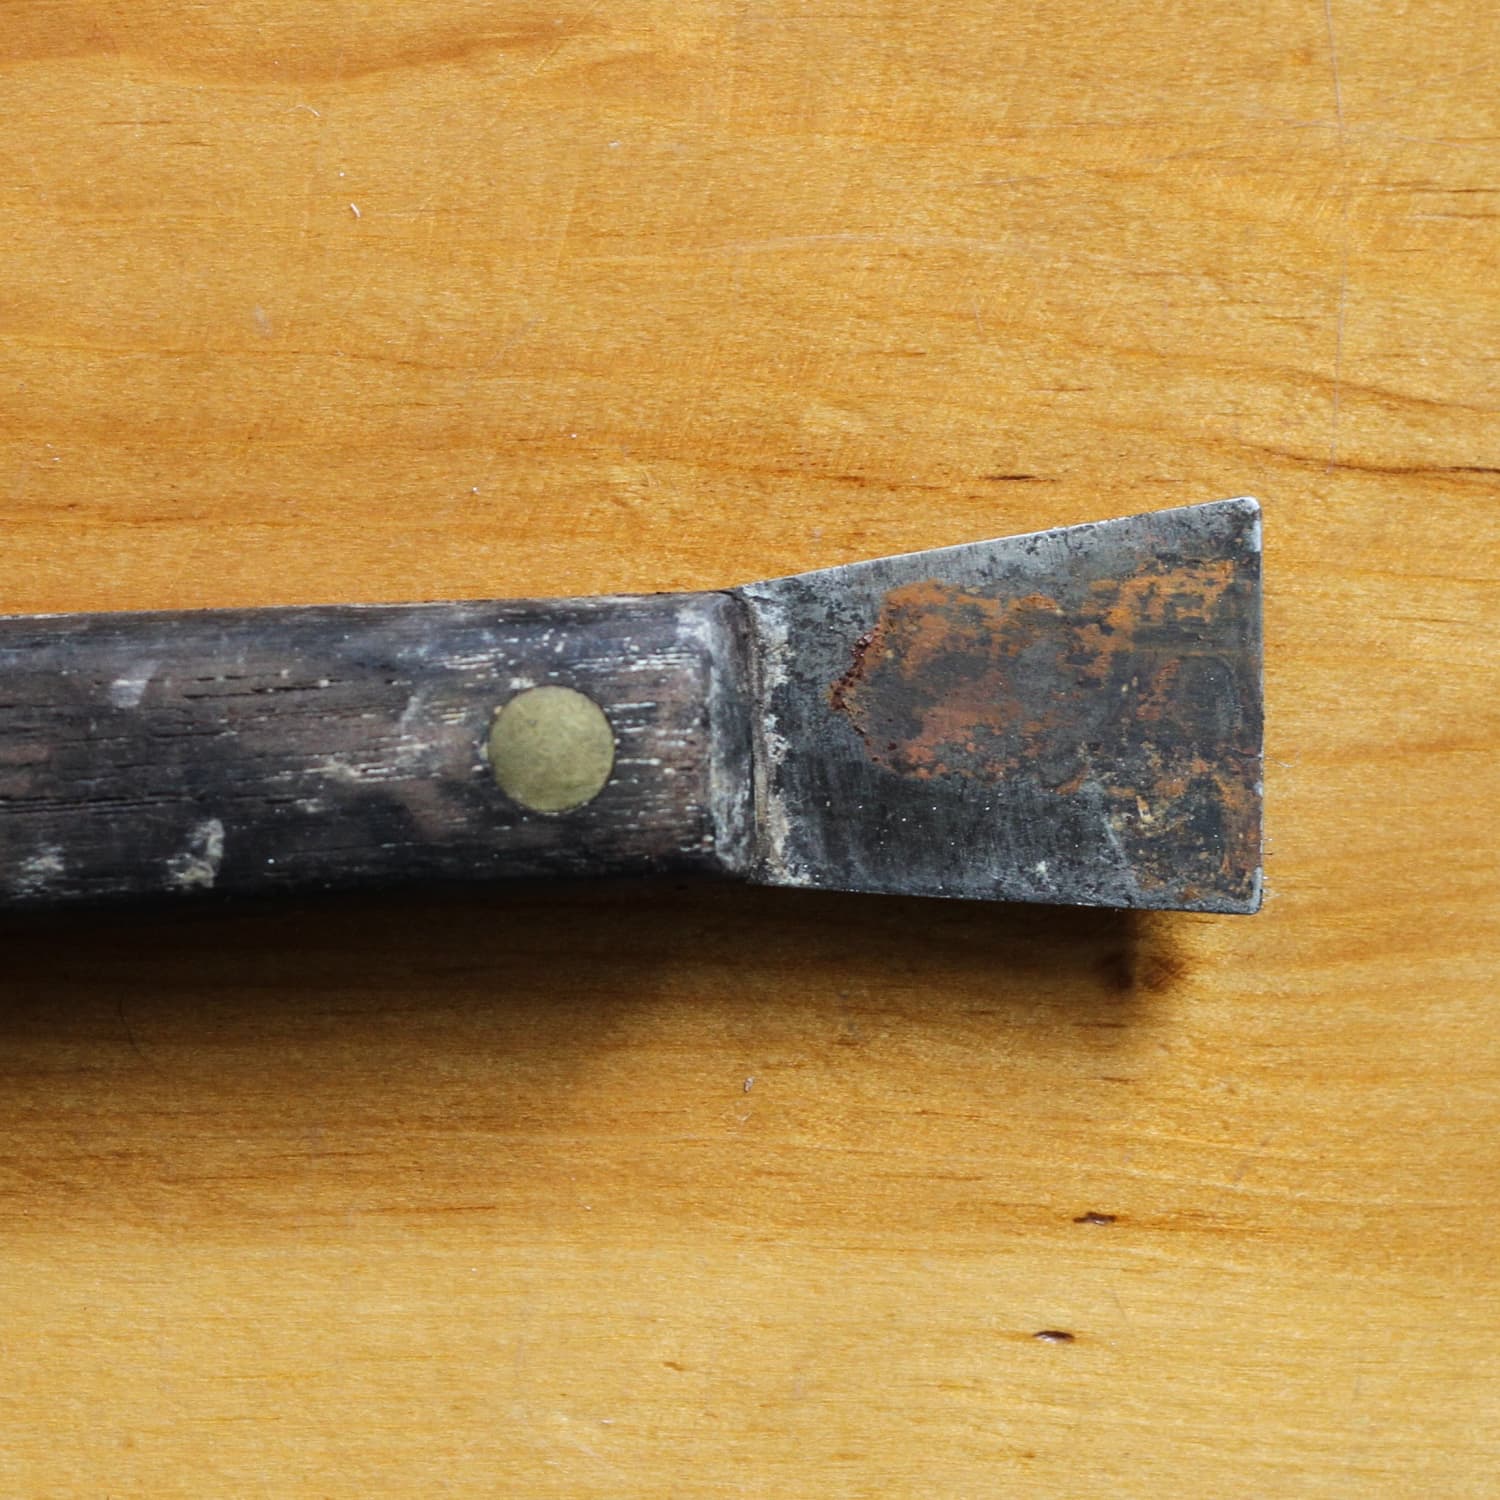 How to Remove Rust from Knives (With Things You Already Have)